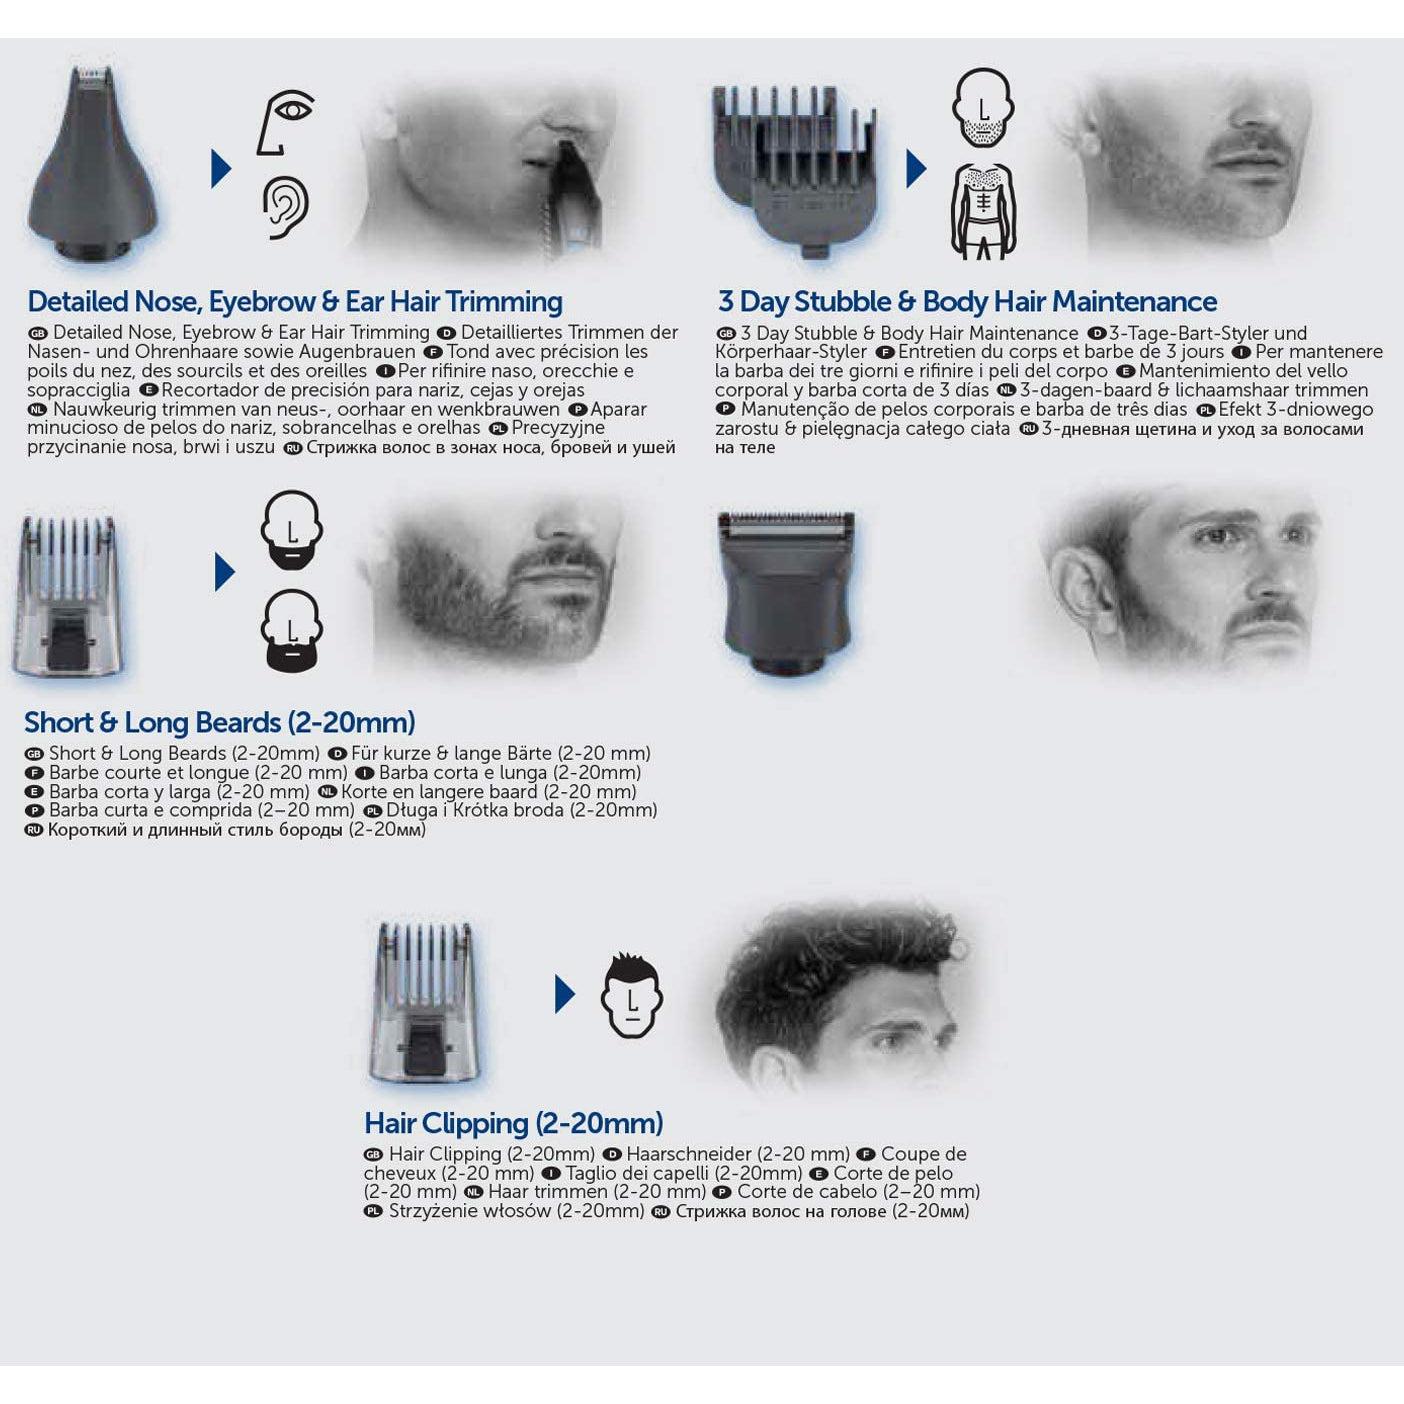 Remington Graphite G2 Multi-Grooming Kit, Electric Body, Detail and Beard Trimmer, PG2000 - Healthxpress.ie